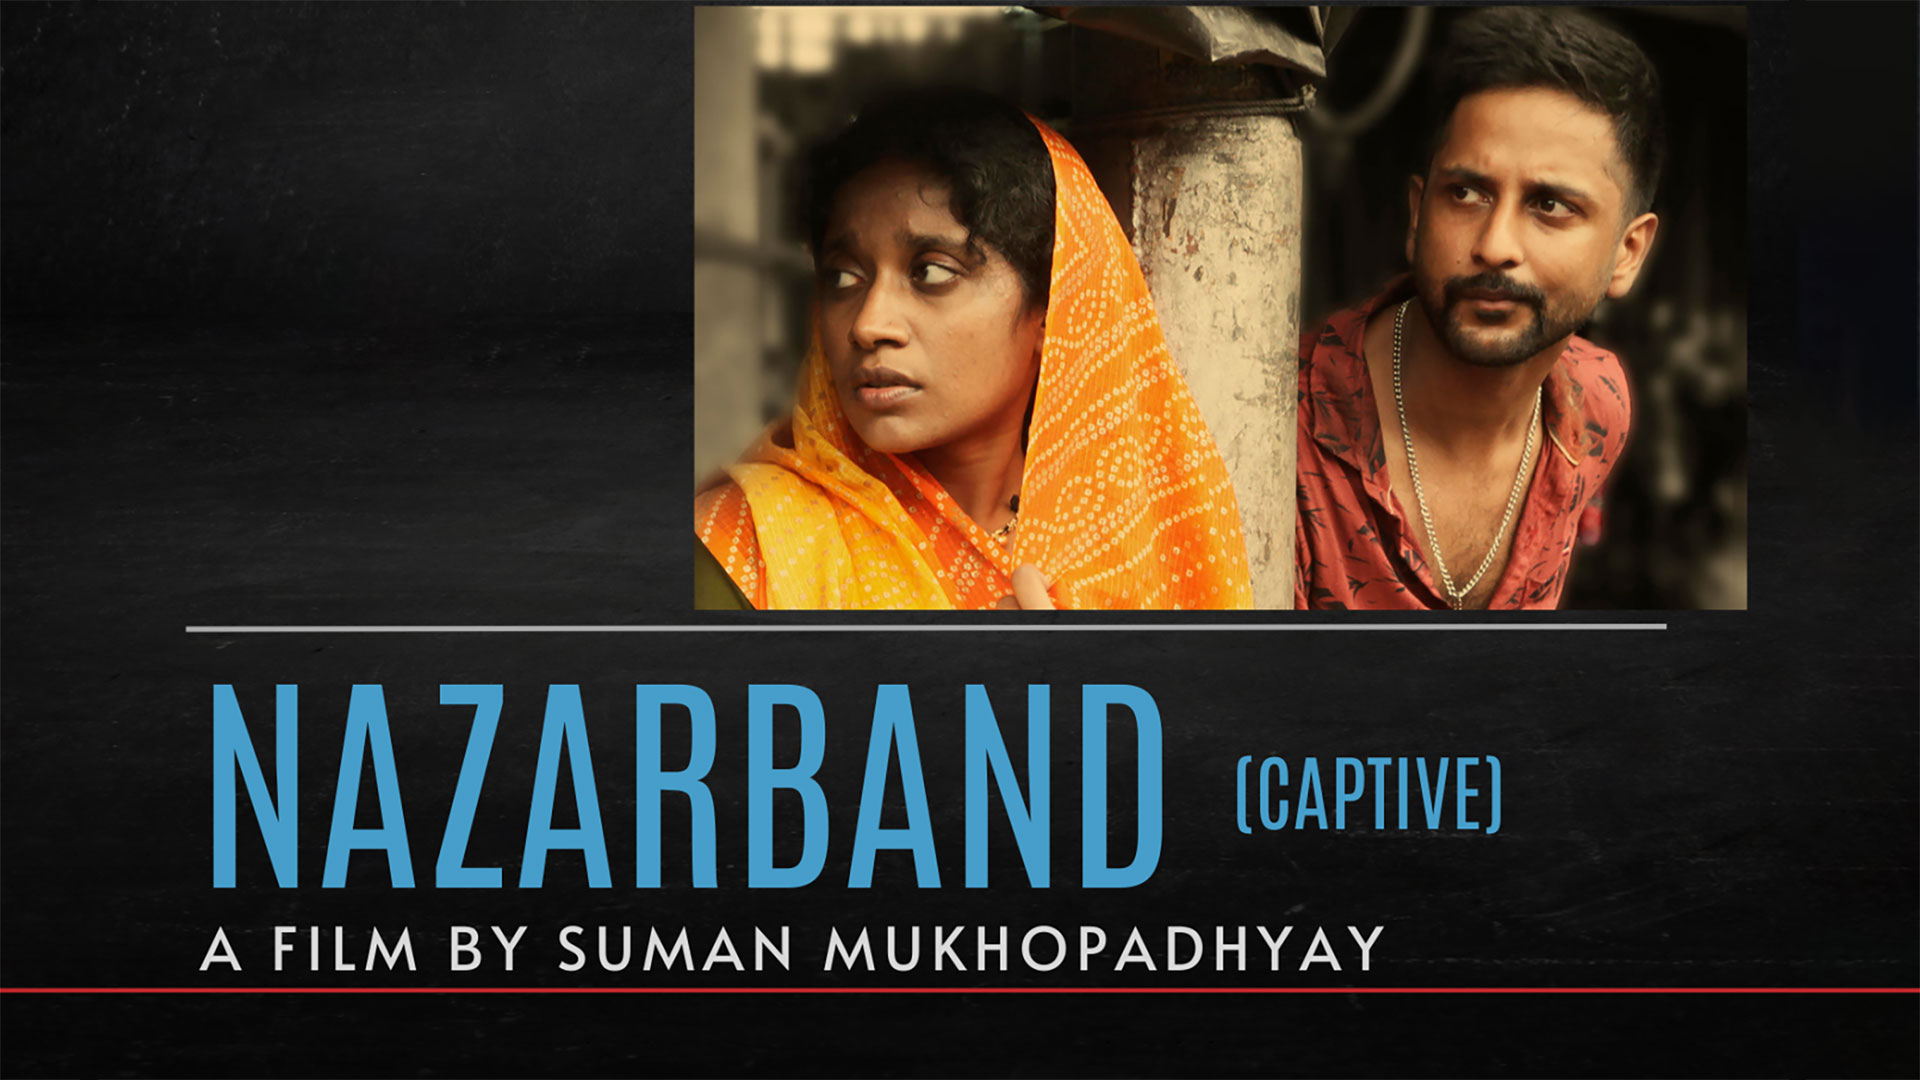 Nazarband (Captive) poster with a woman and man in orange and red clothing